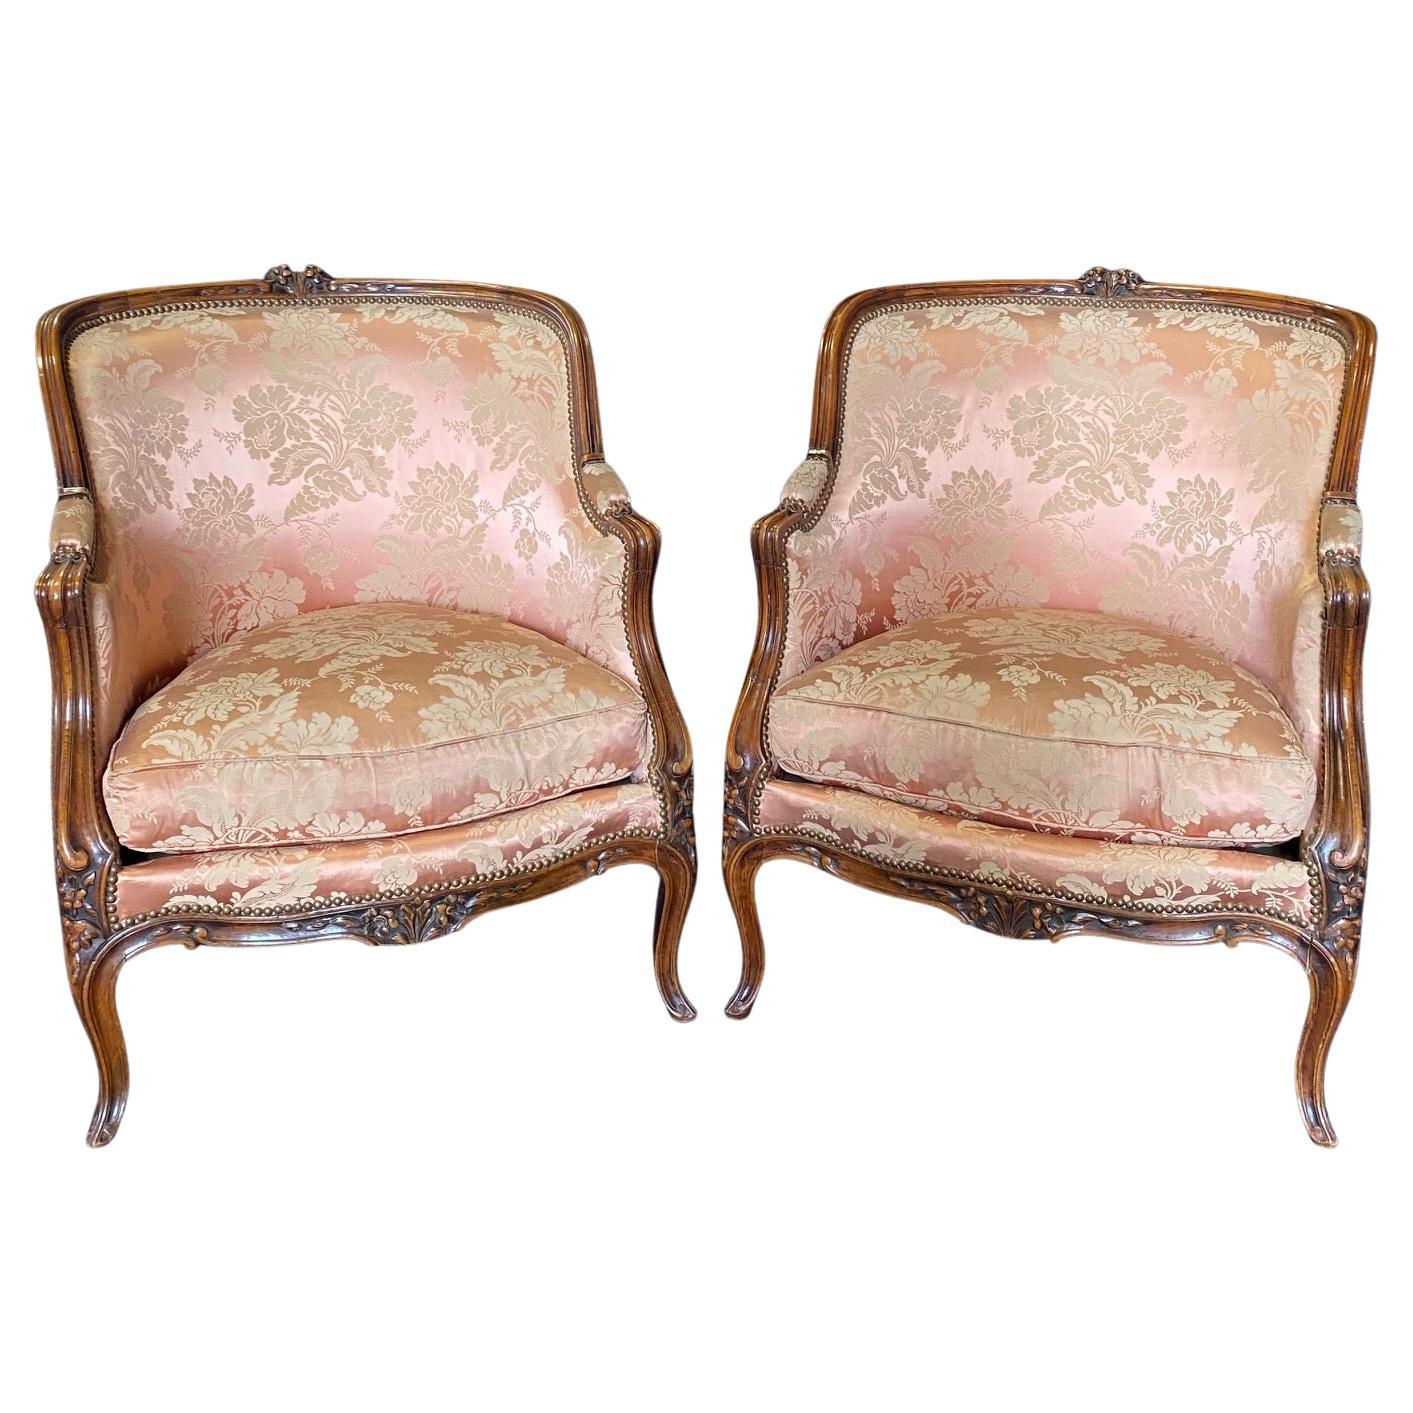 Exquisite Pair of Antique Louis XV Carved Walnut Bergere Chairs or Club Chairs 